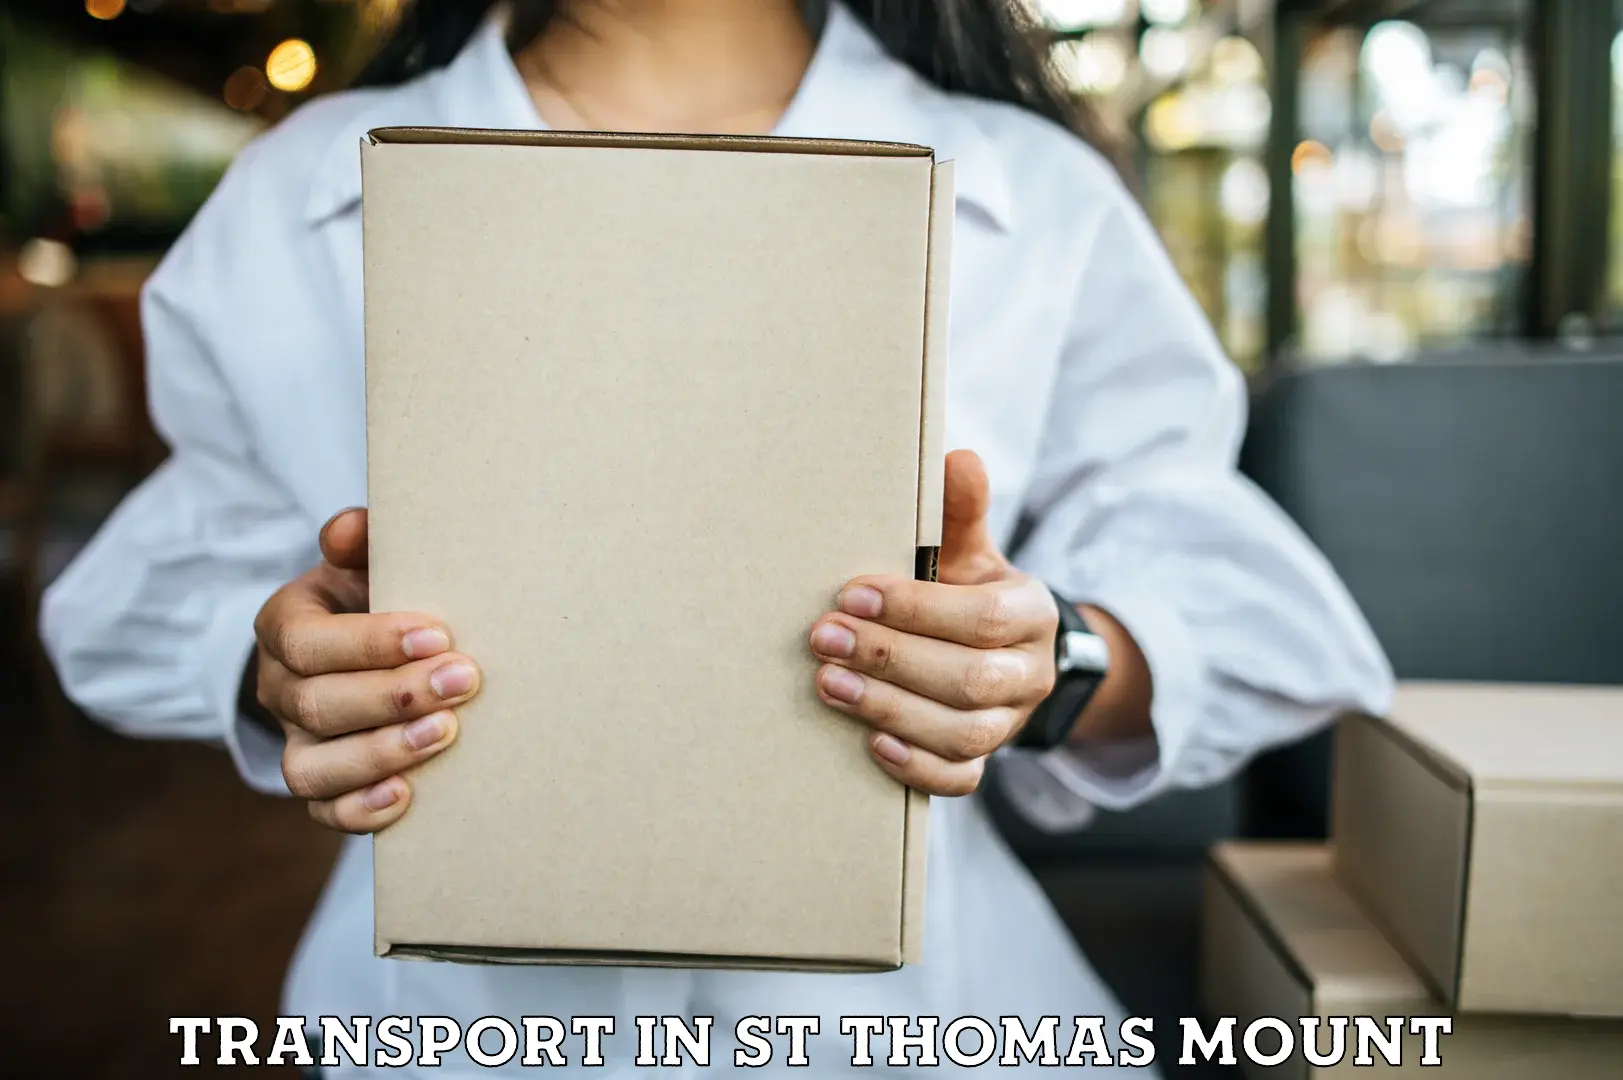 Transportation services in St Thomas Mount